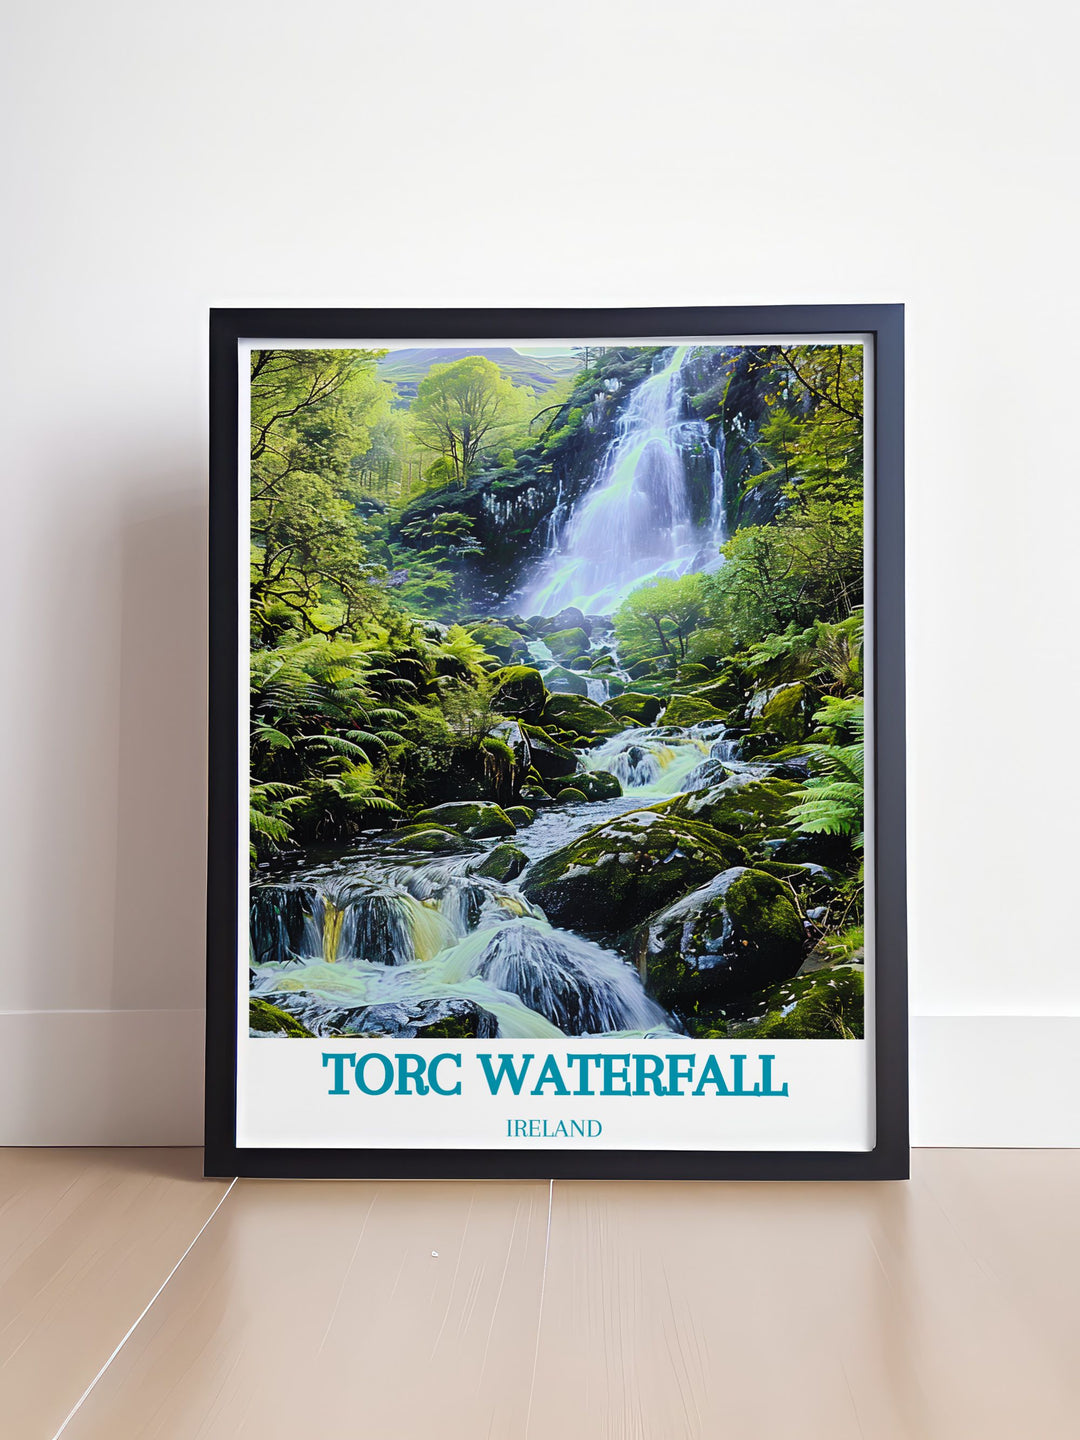 Revel in the stunning vistas and tranquil beauty of Torc Waterfall with this travel poster, ideal for adding a touch of Ireland to your home.